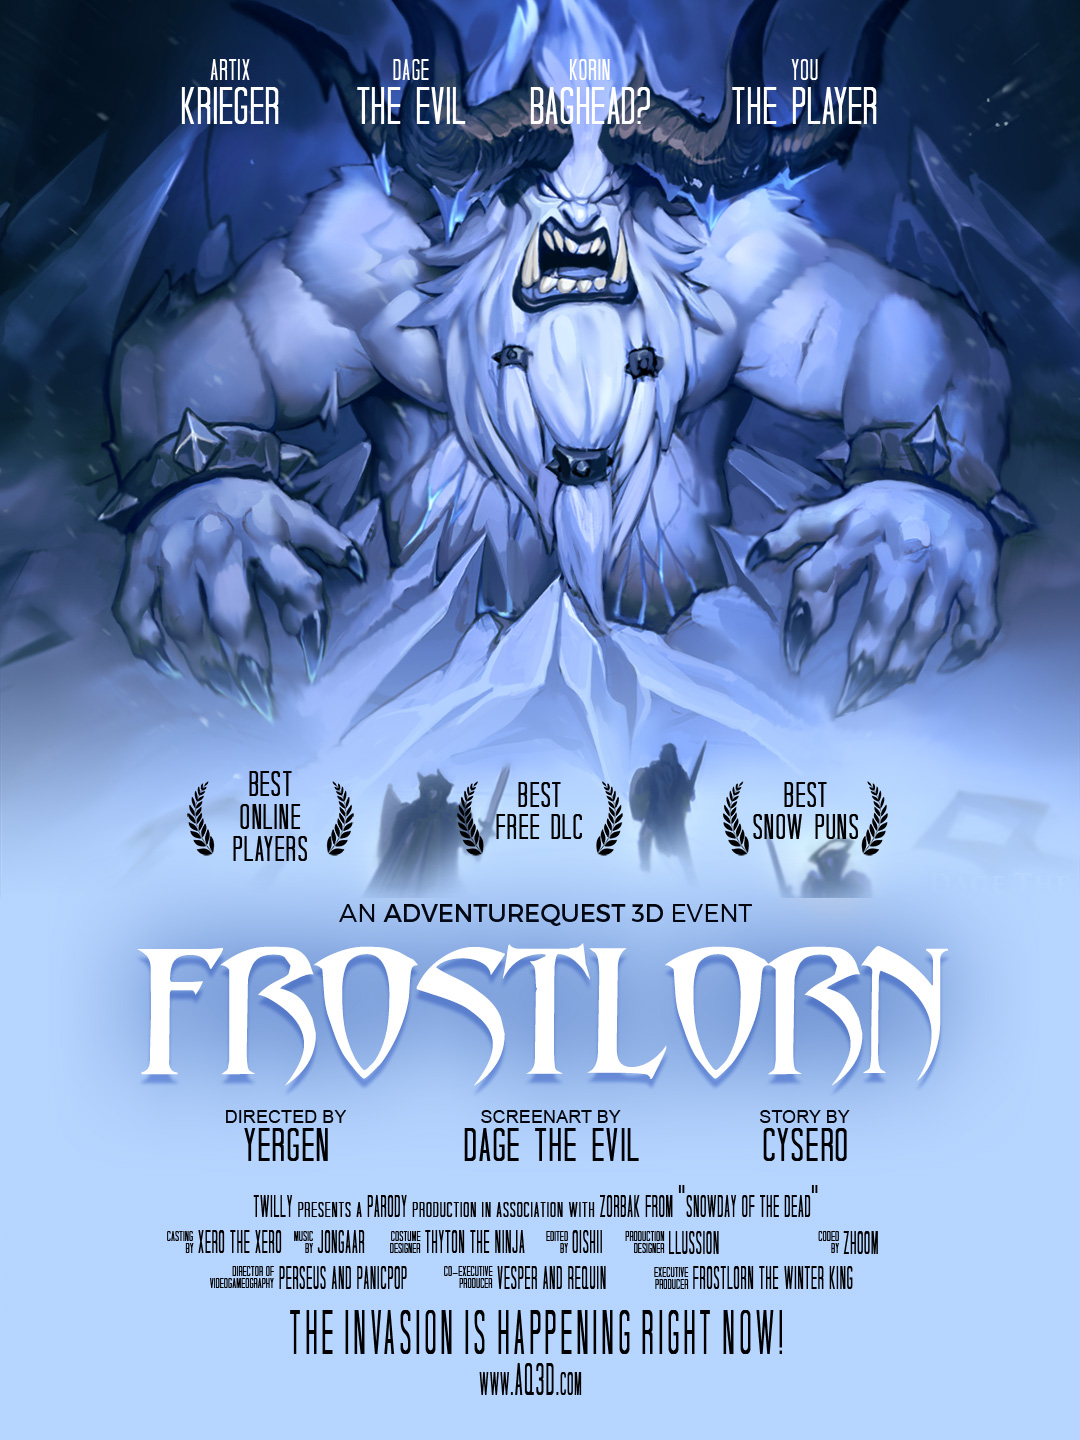 The FrostLorn